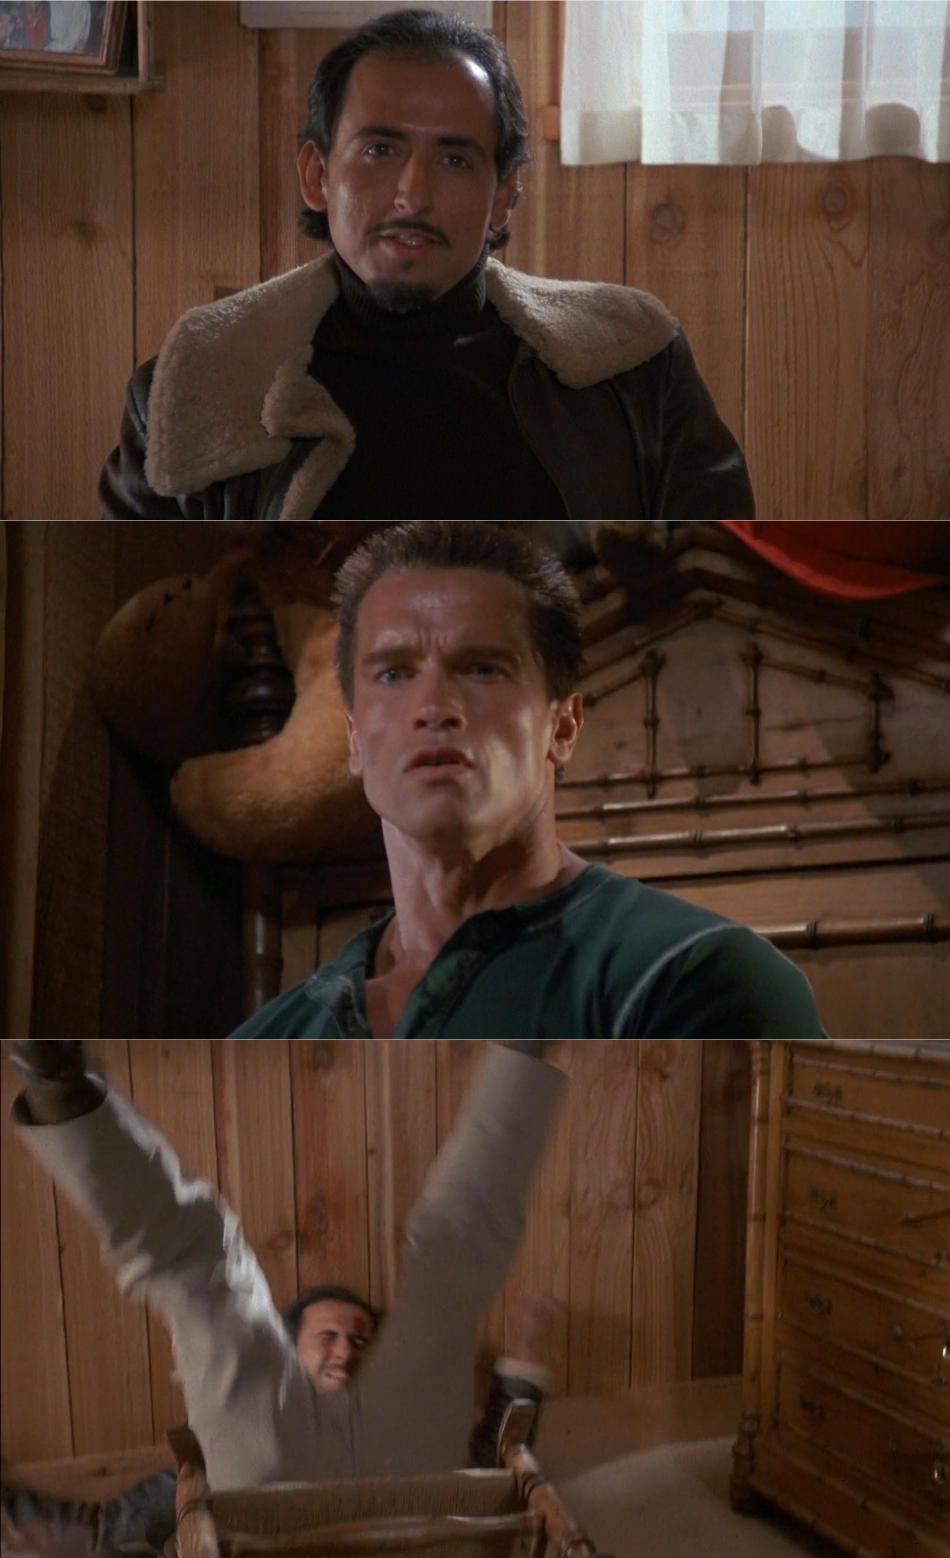 High Quality Arnold Commando. Right? Wrong. Blank Meme Template